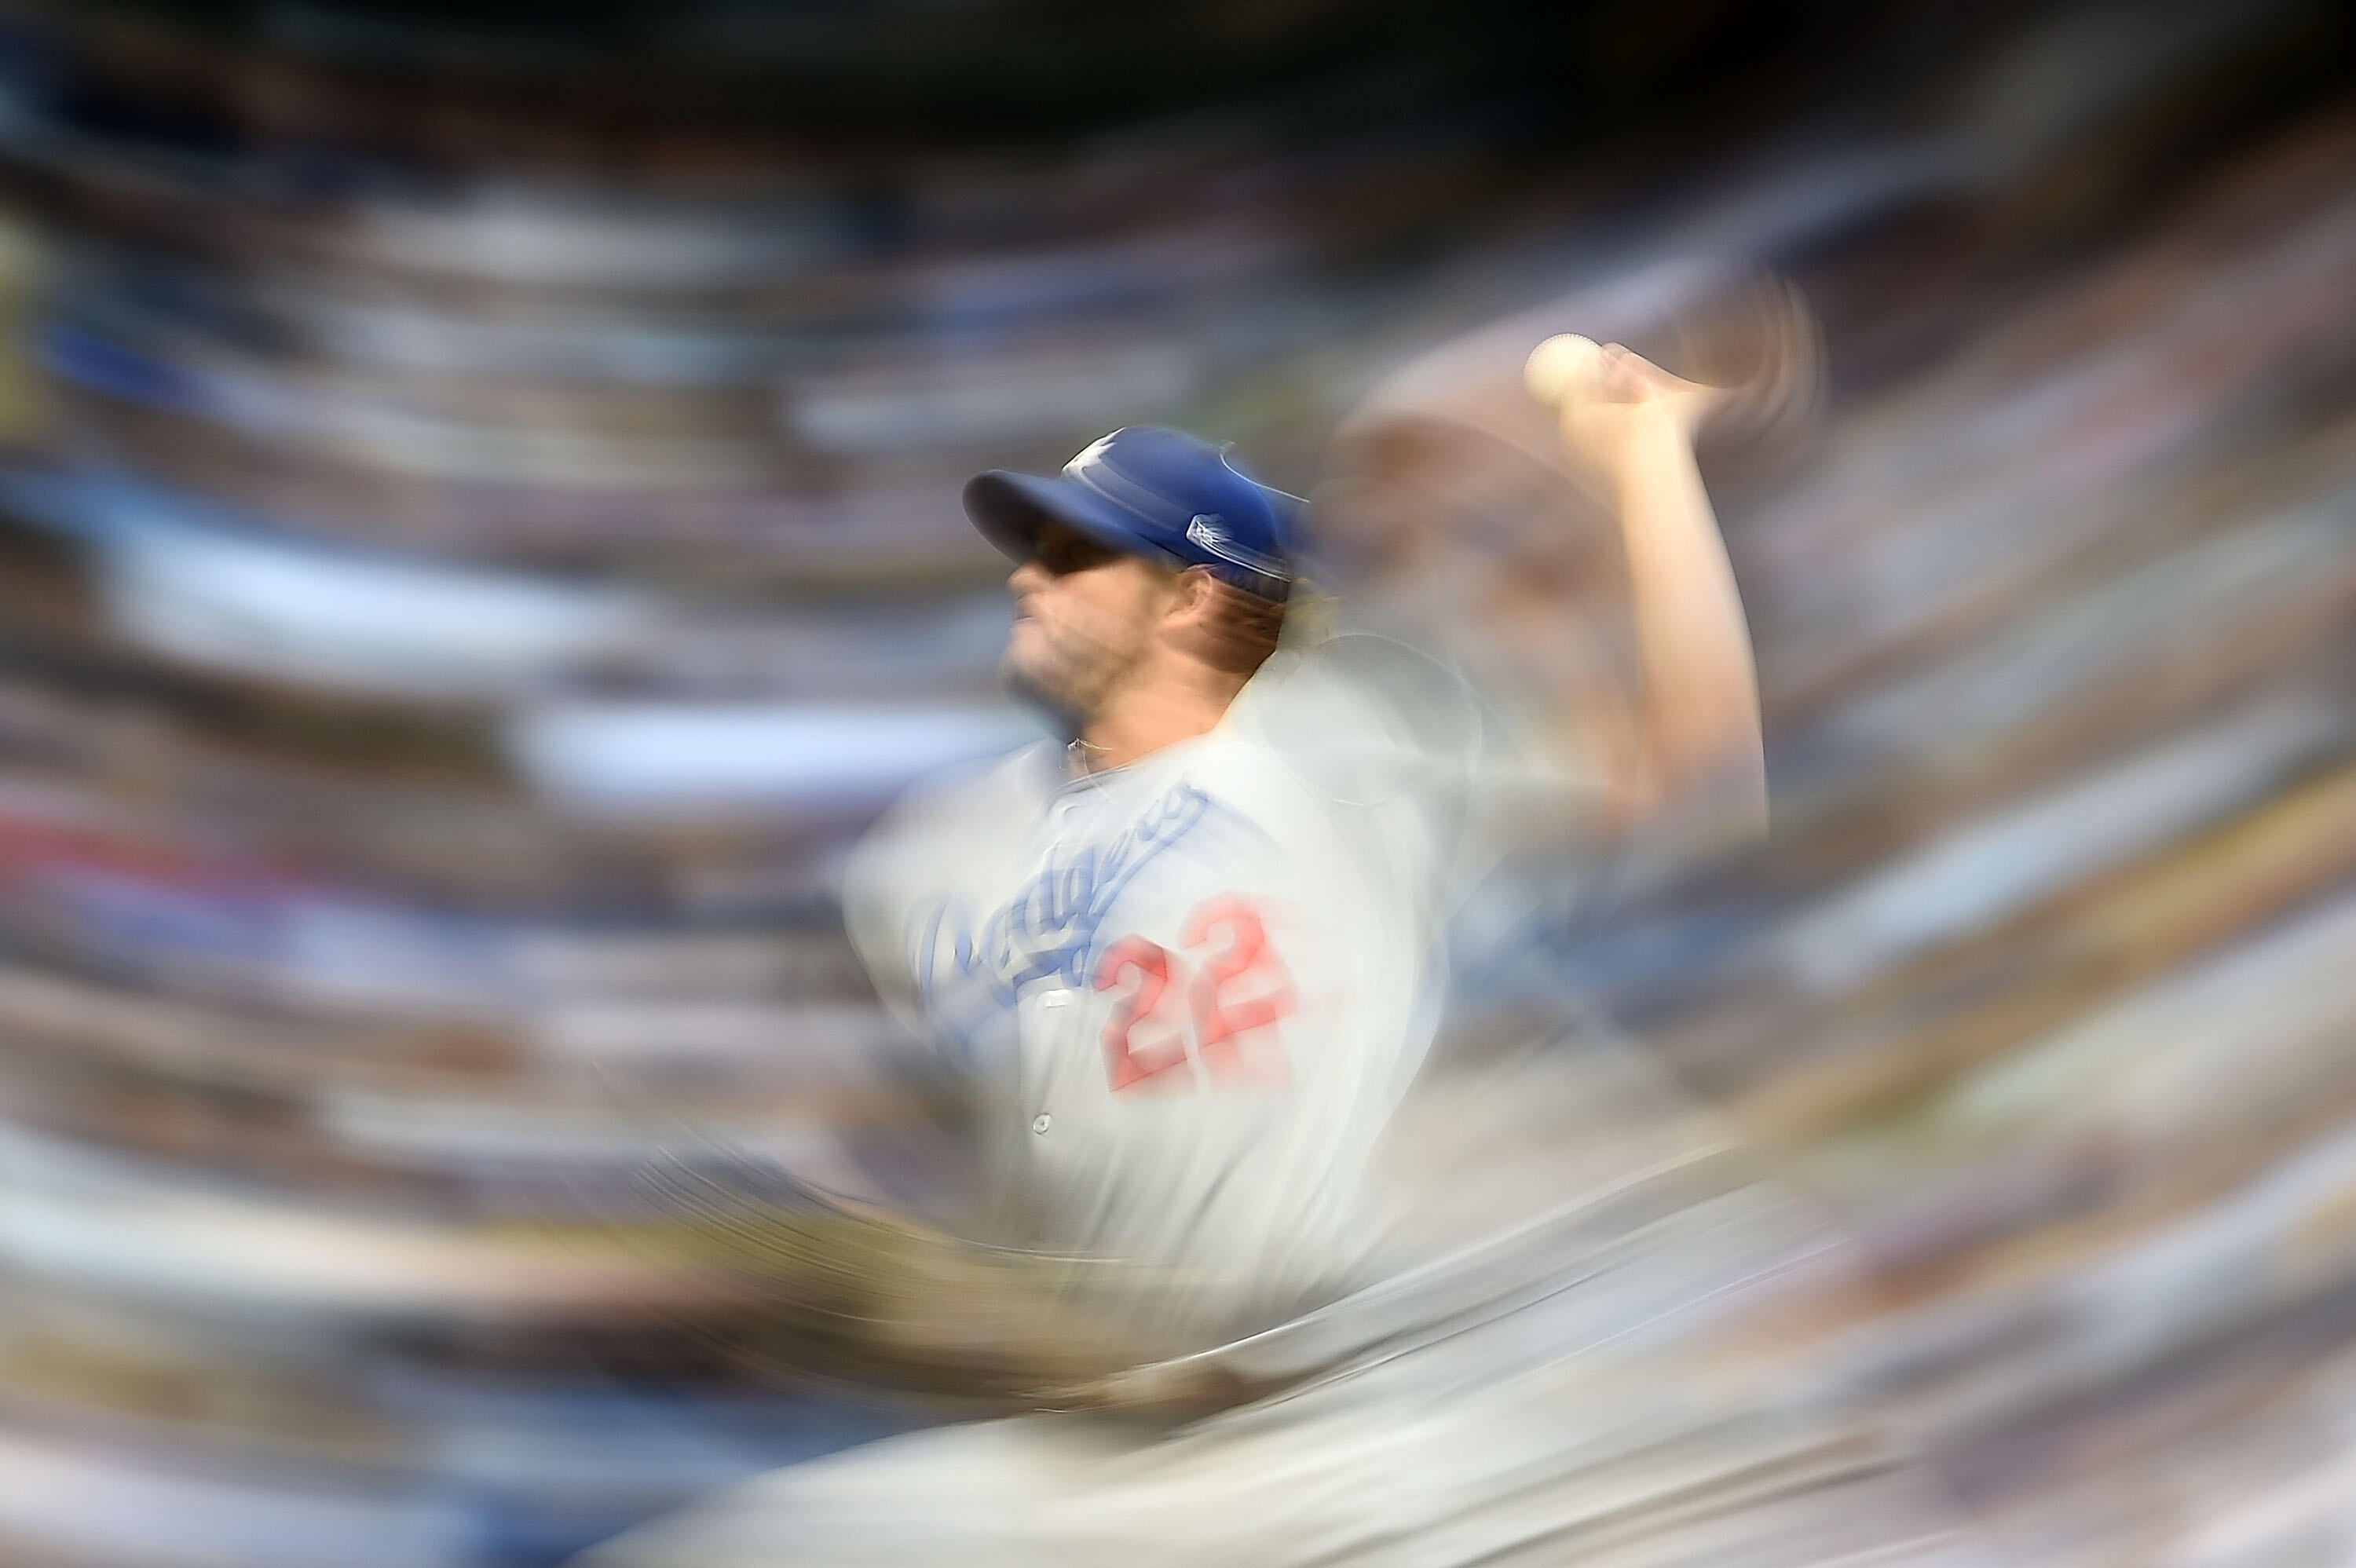 MILWAUKEE, WI - JUNE 02:  Clayton Kershaw #22 of the Los Angeles Dodgers throws a pitch during the fourth inning of a game against the Milwaukee Brewers at Miller Park on June 2, 2017 in Milwaukee, Wisconsin.  (Photo by Stacy Revere/Getty Images)